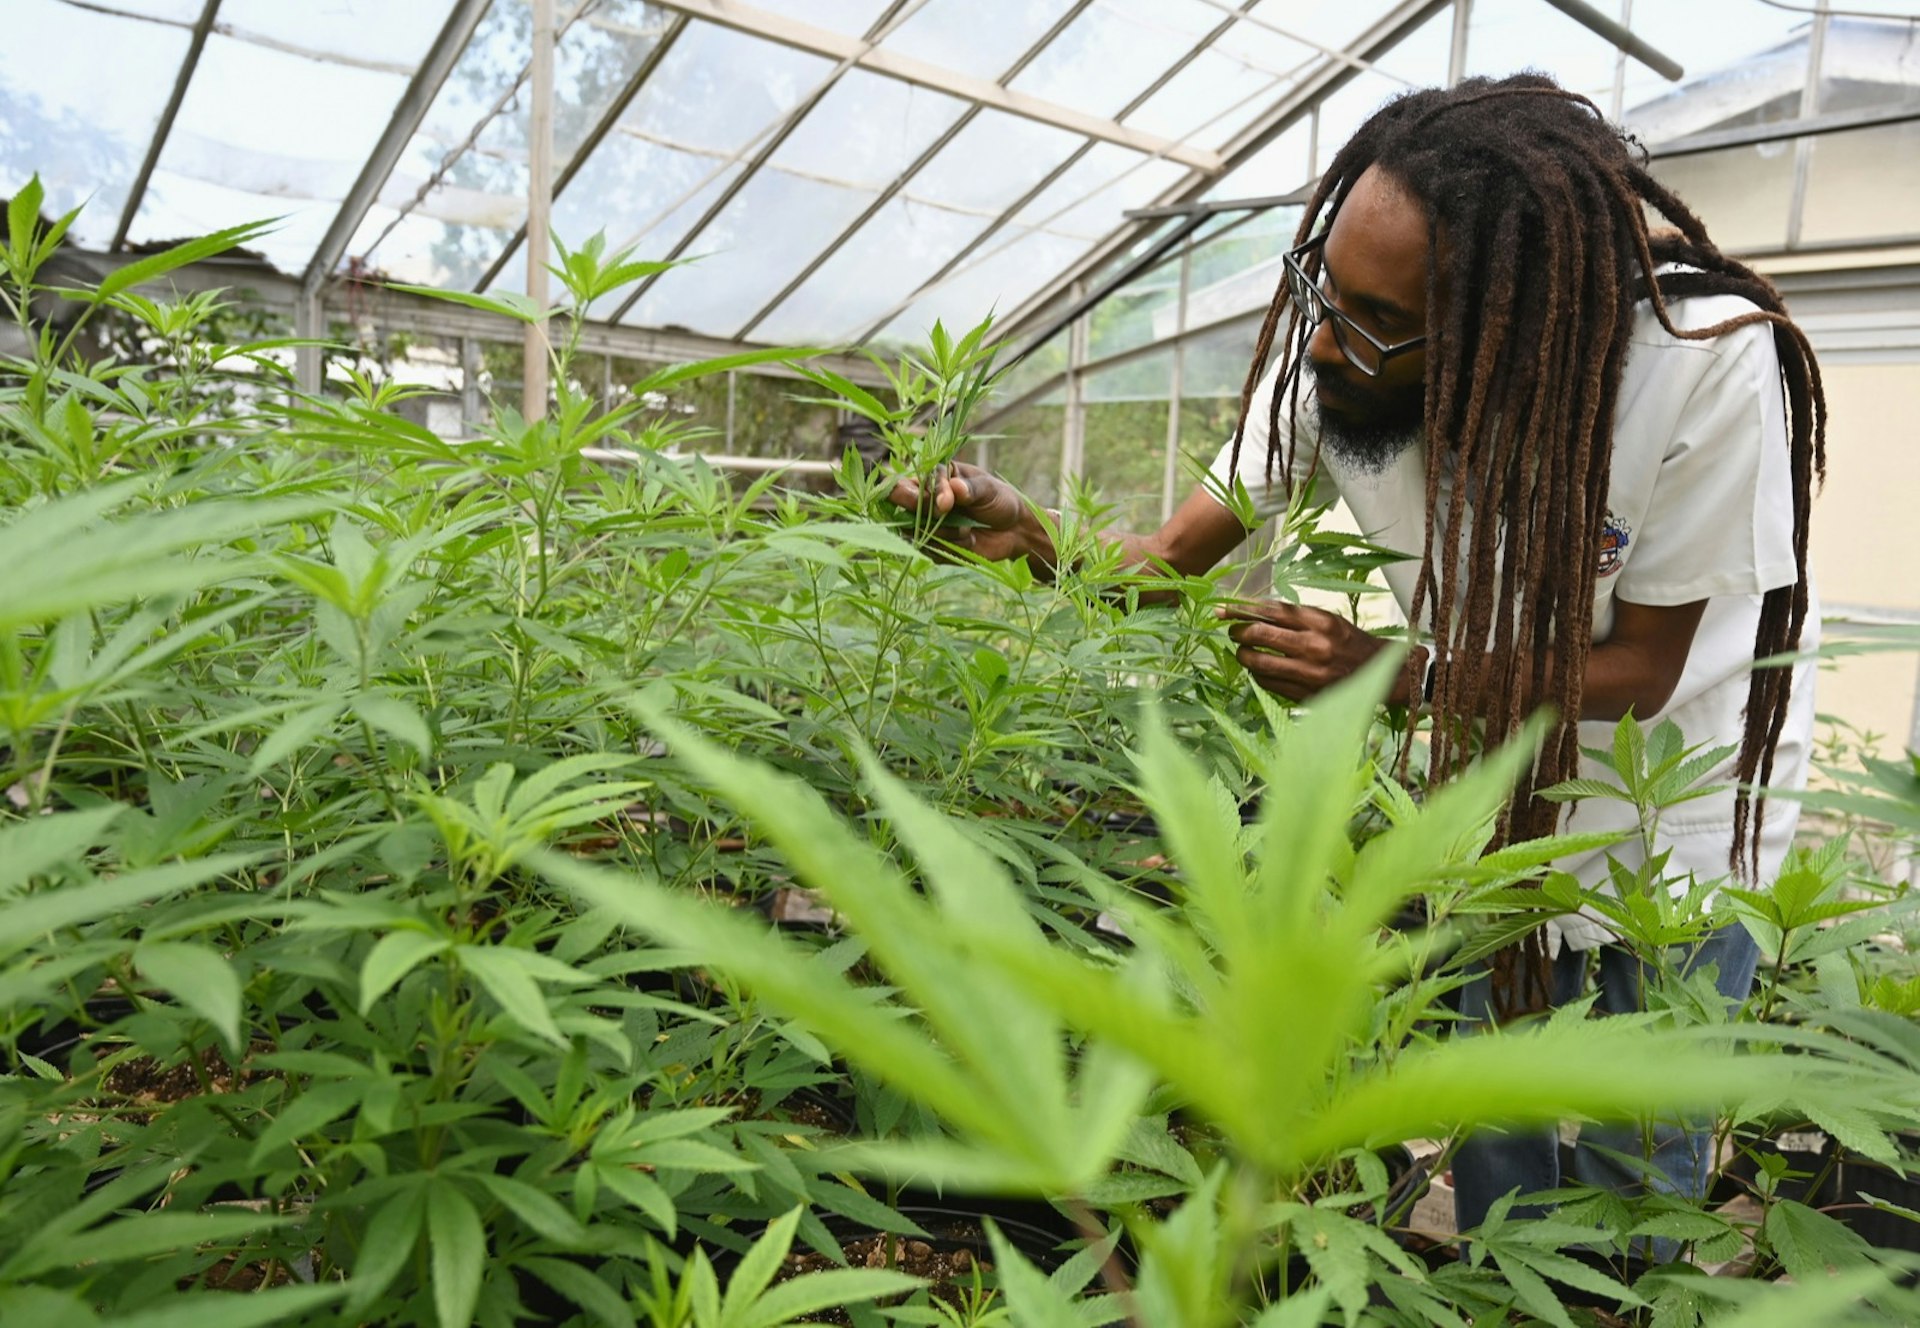 Dr. Machel A. Emanuel analyses cannabis plants at the University of the West Indies Mona campus in Kingston; smoking weed Jamaica